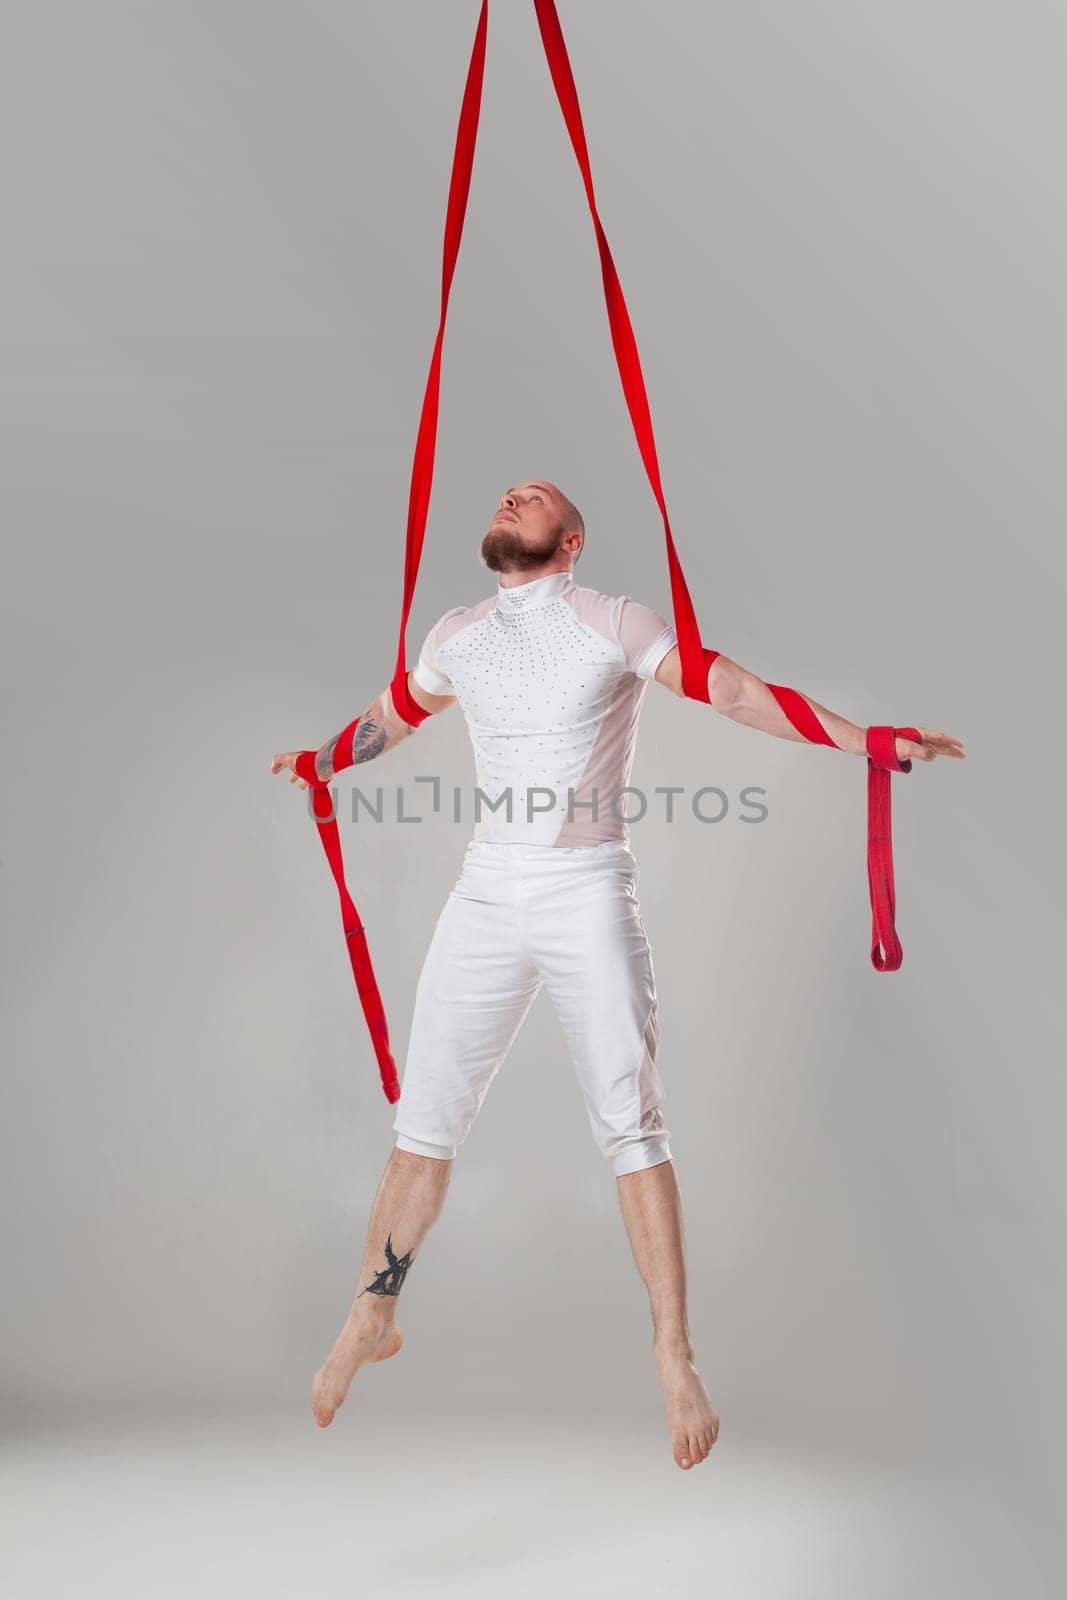 Gymnast performance on a red canvases. Strong man in a light sport suit is doing an acrobatic elements hanging on a rope in a studio isolated on white background. Dancing in the air with balance.